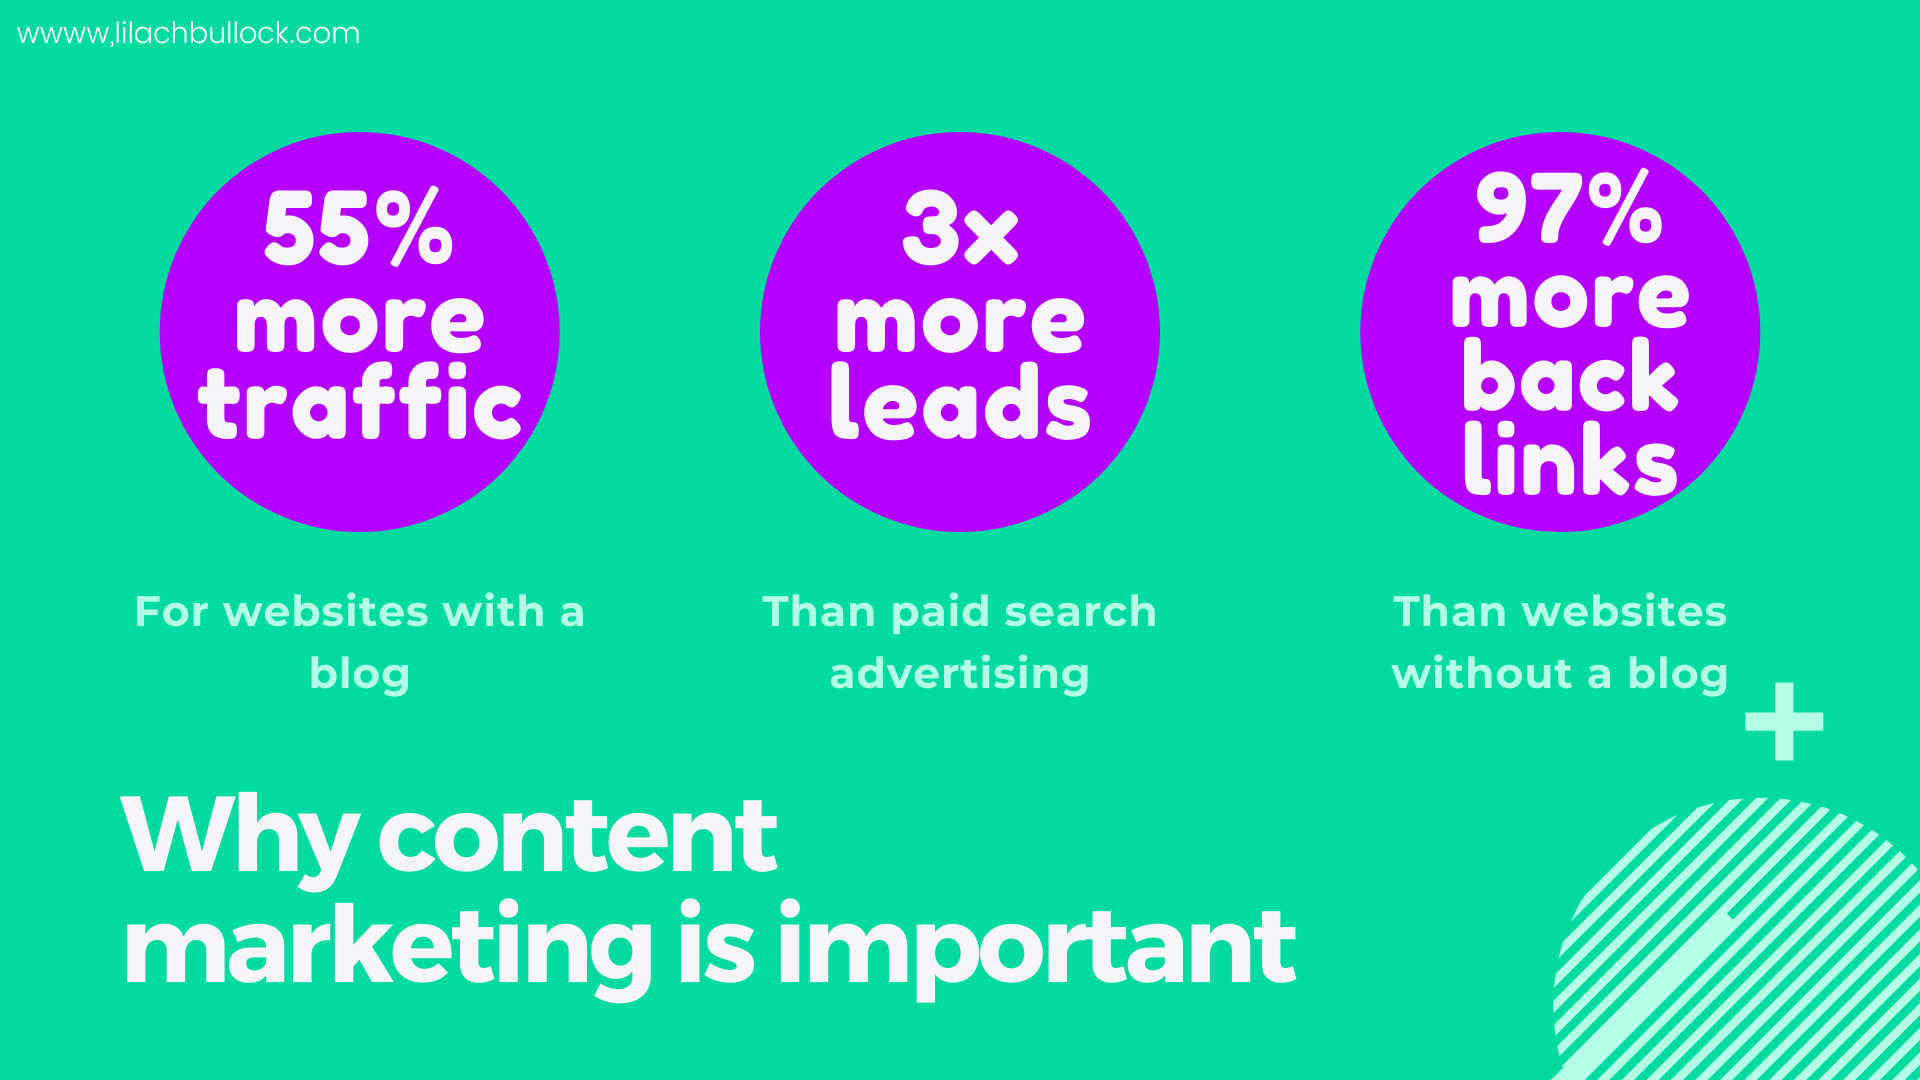 Why is content marketing important